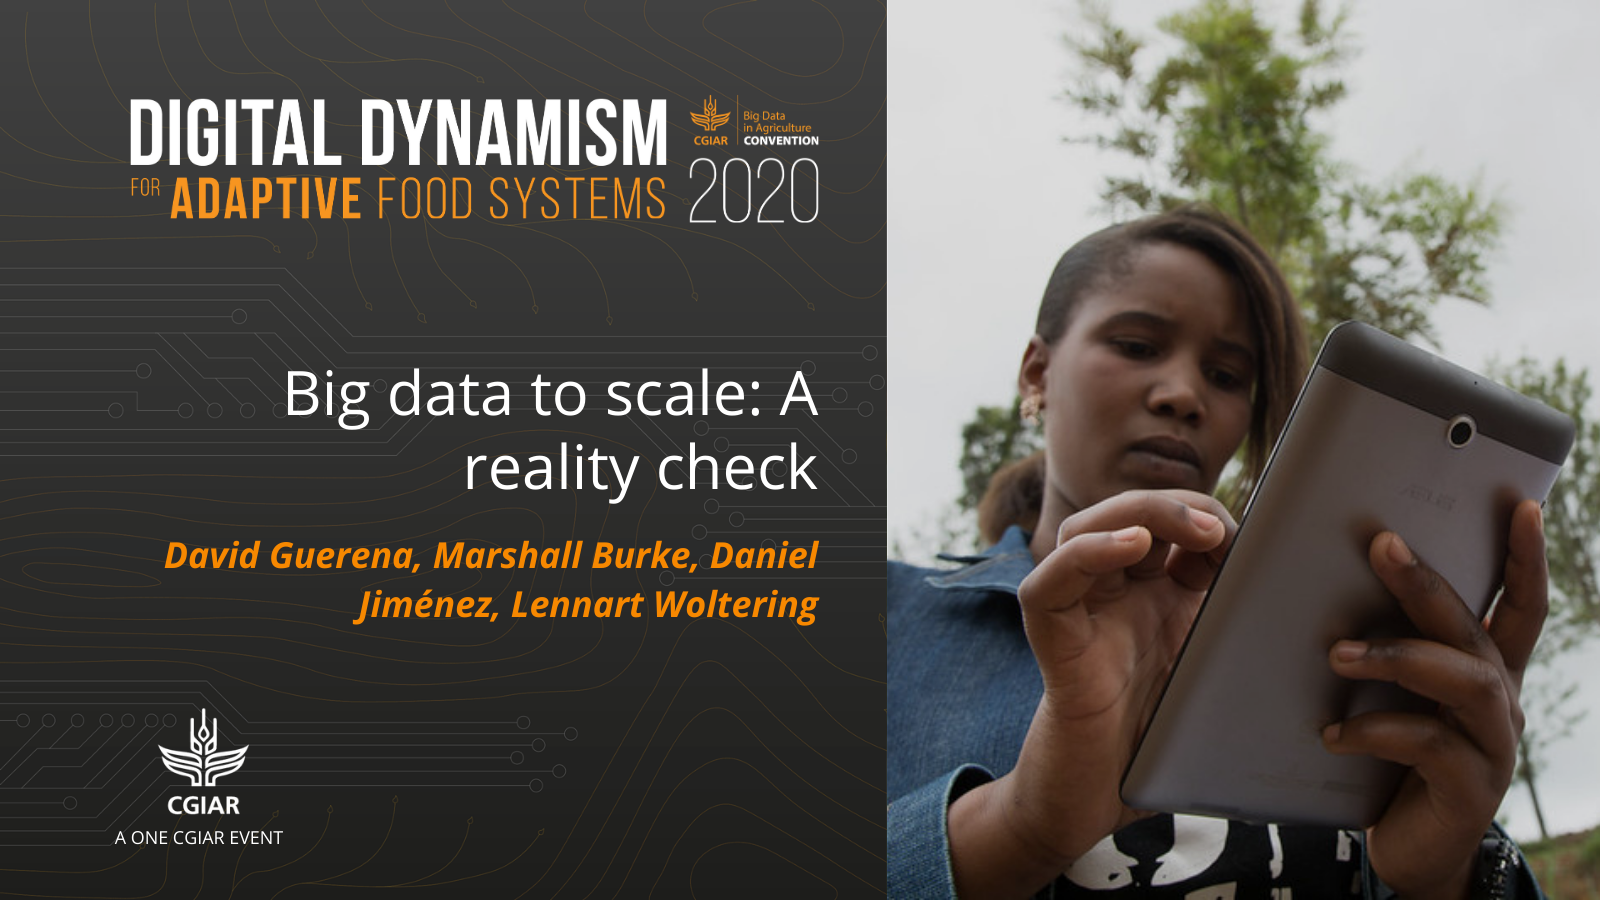 2020 Convention session - Big data to scale: A reality check